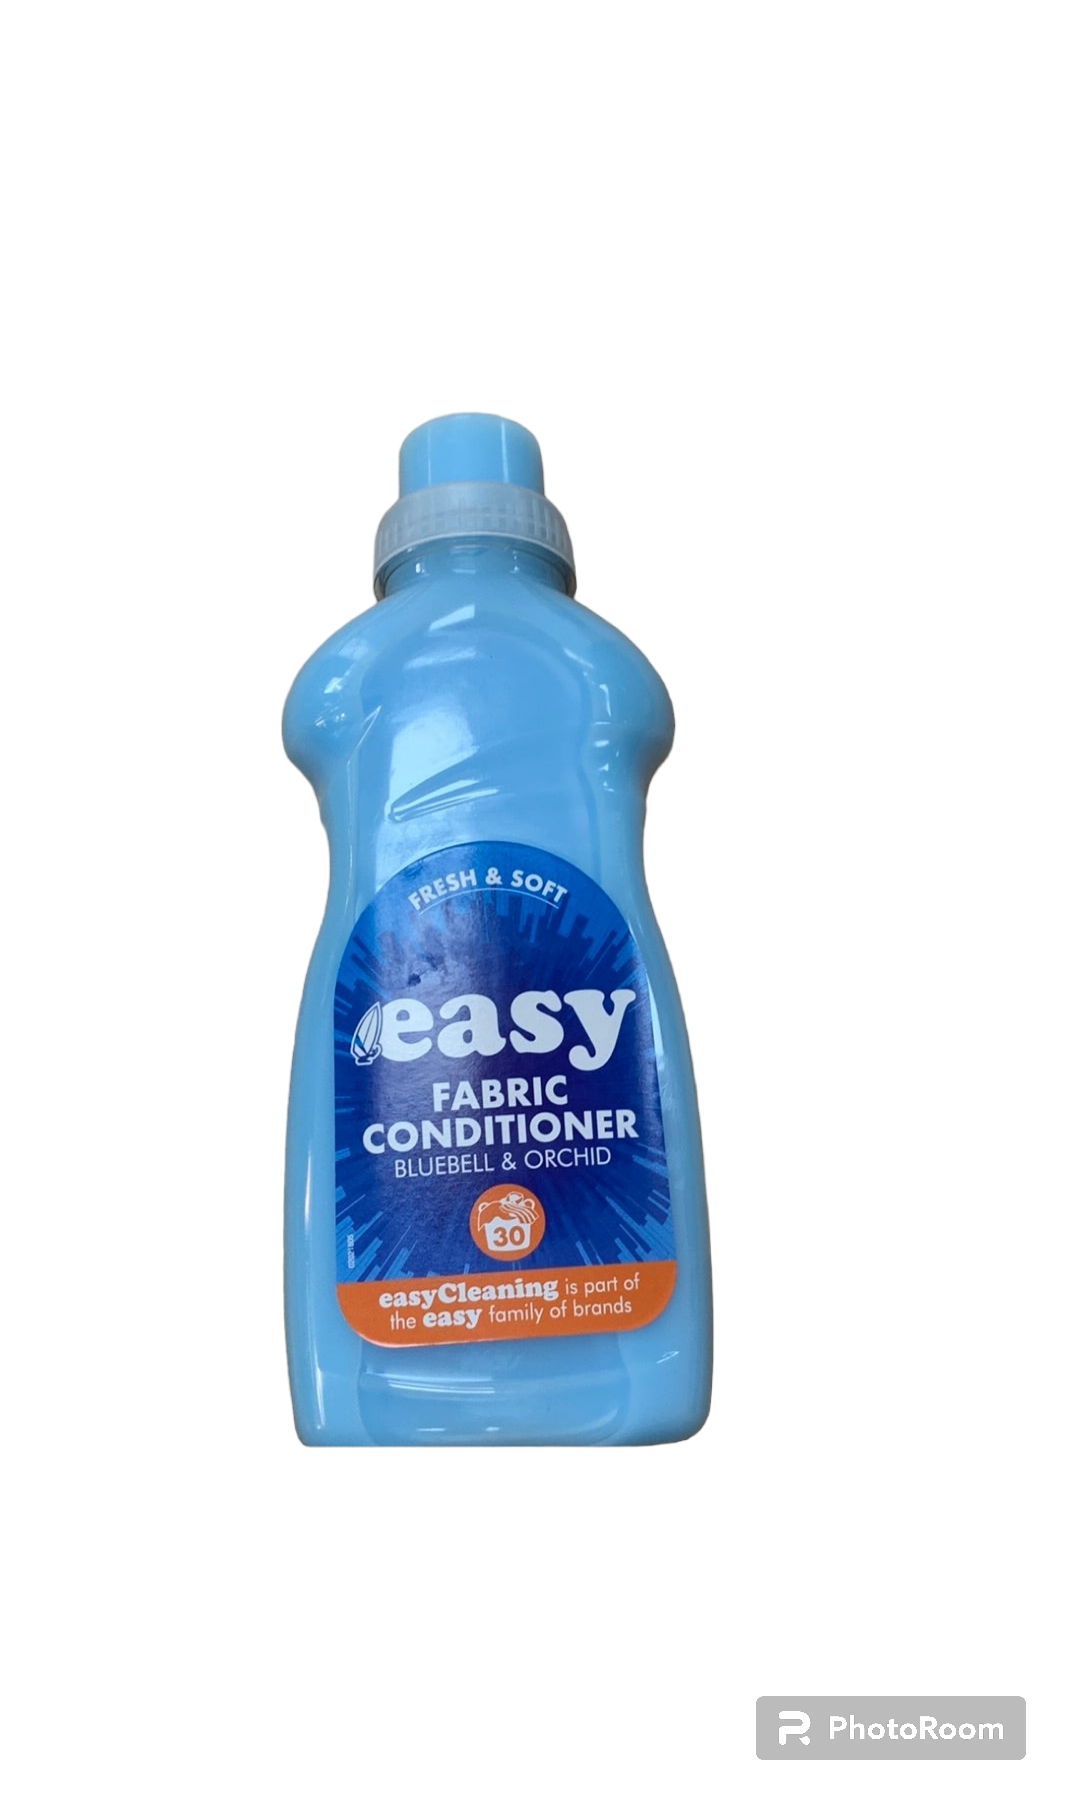 Easy fabric conditioner bluebell & orchid 750ml